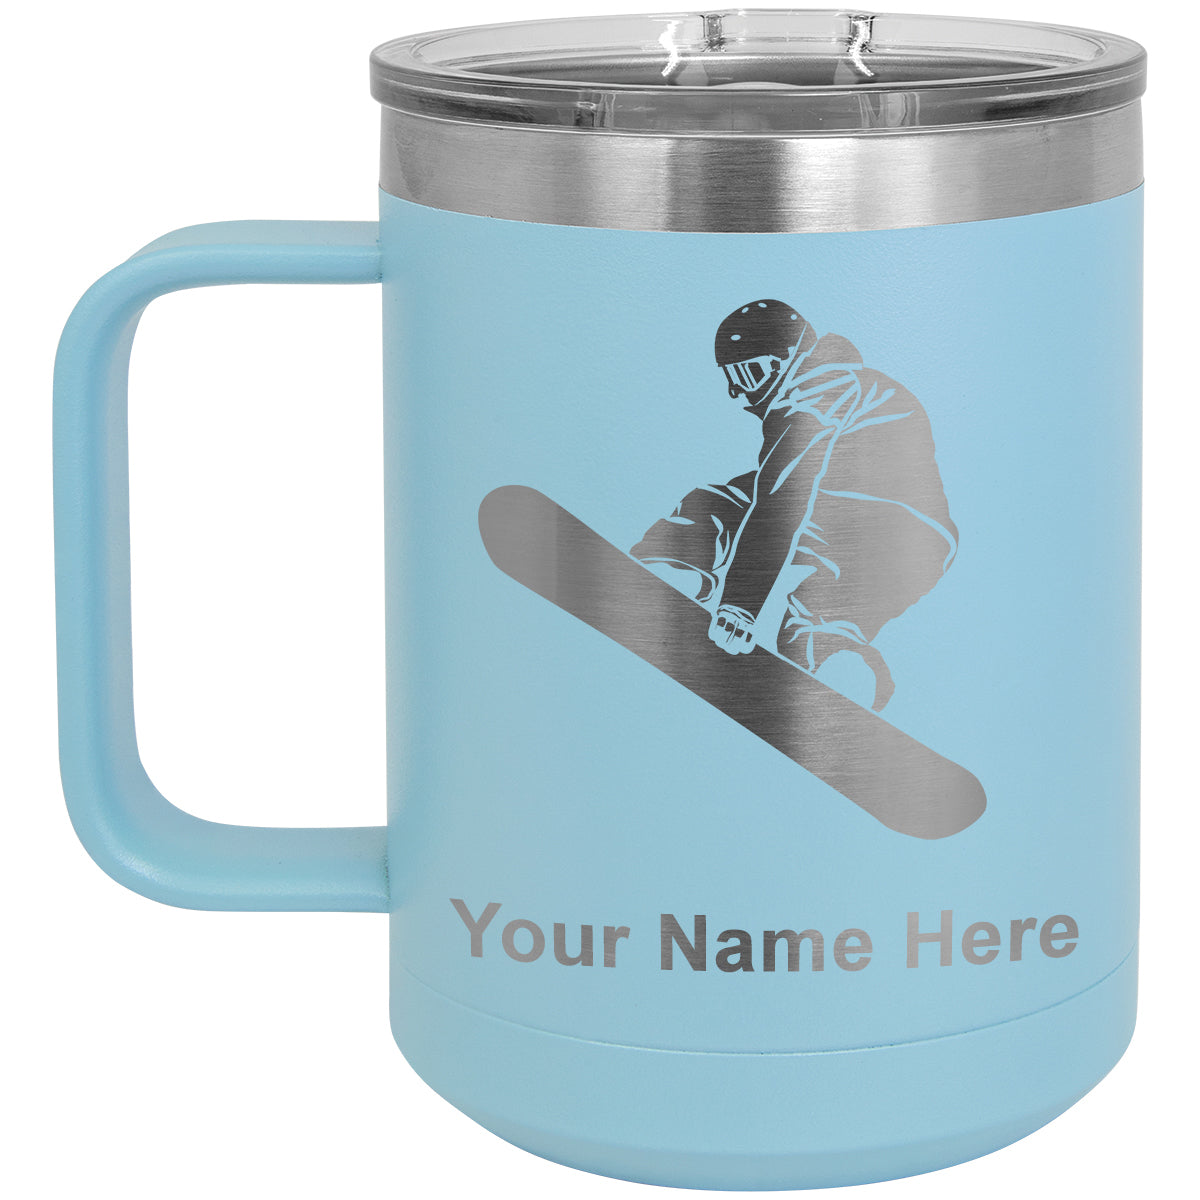 15oz Vacuum Insulated Coffee Mug, Snowboarder Man, Personalized Engraving Included